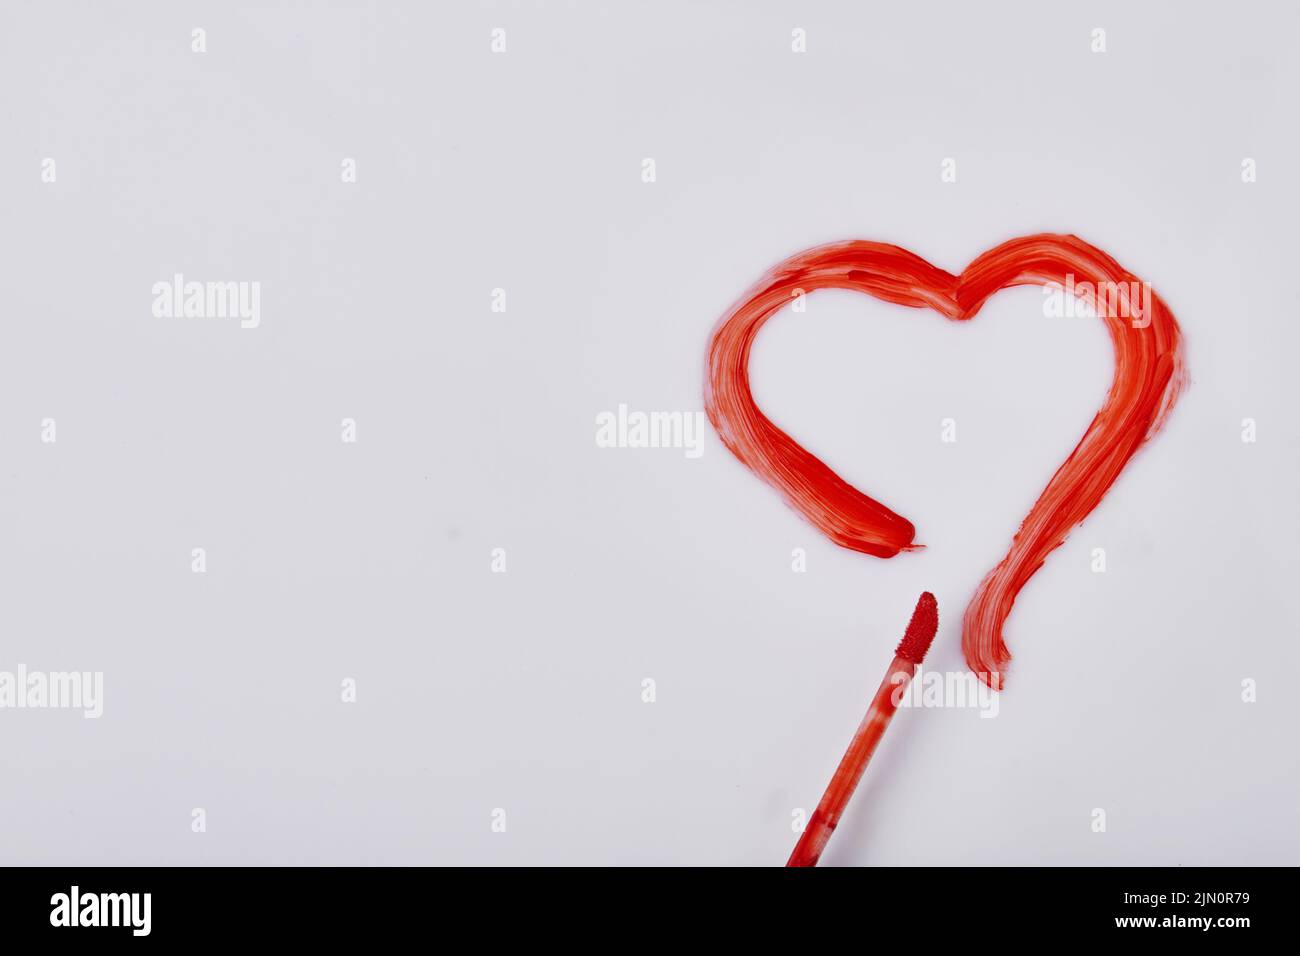 Red heart drawn by mascara on white surface. Valentines day concept. Stock Photo